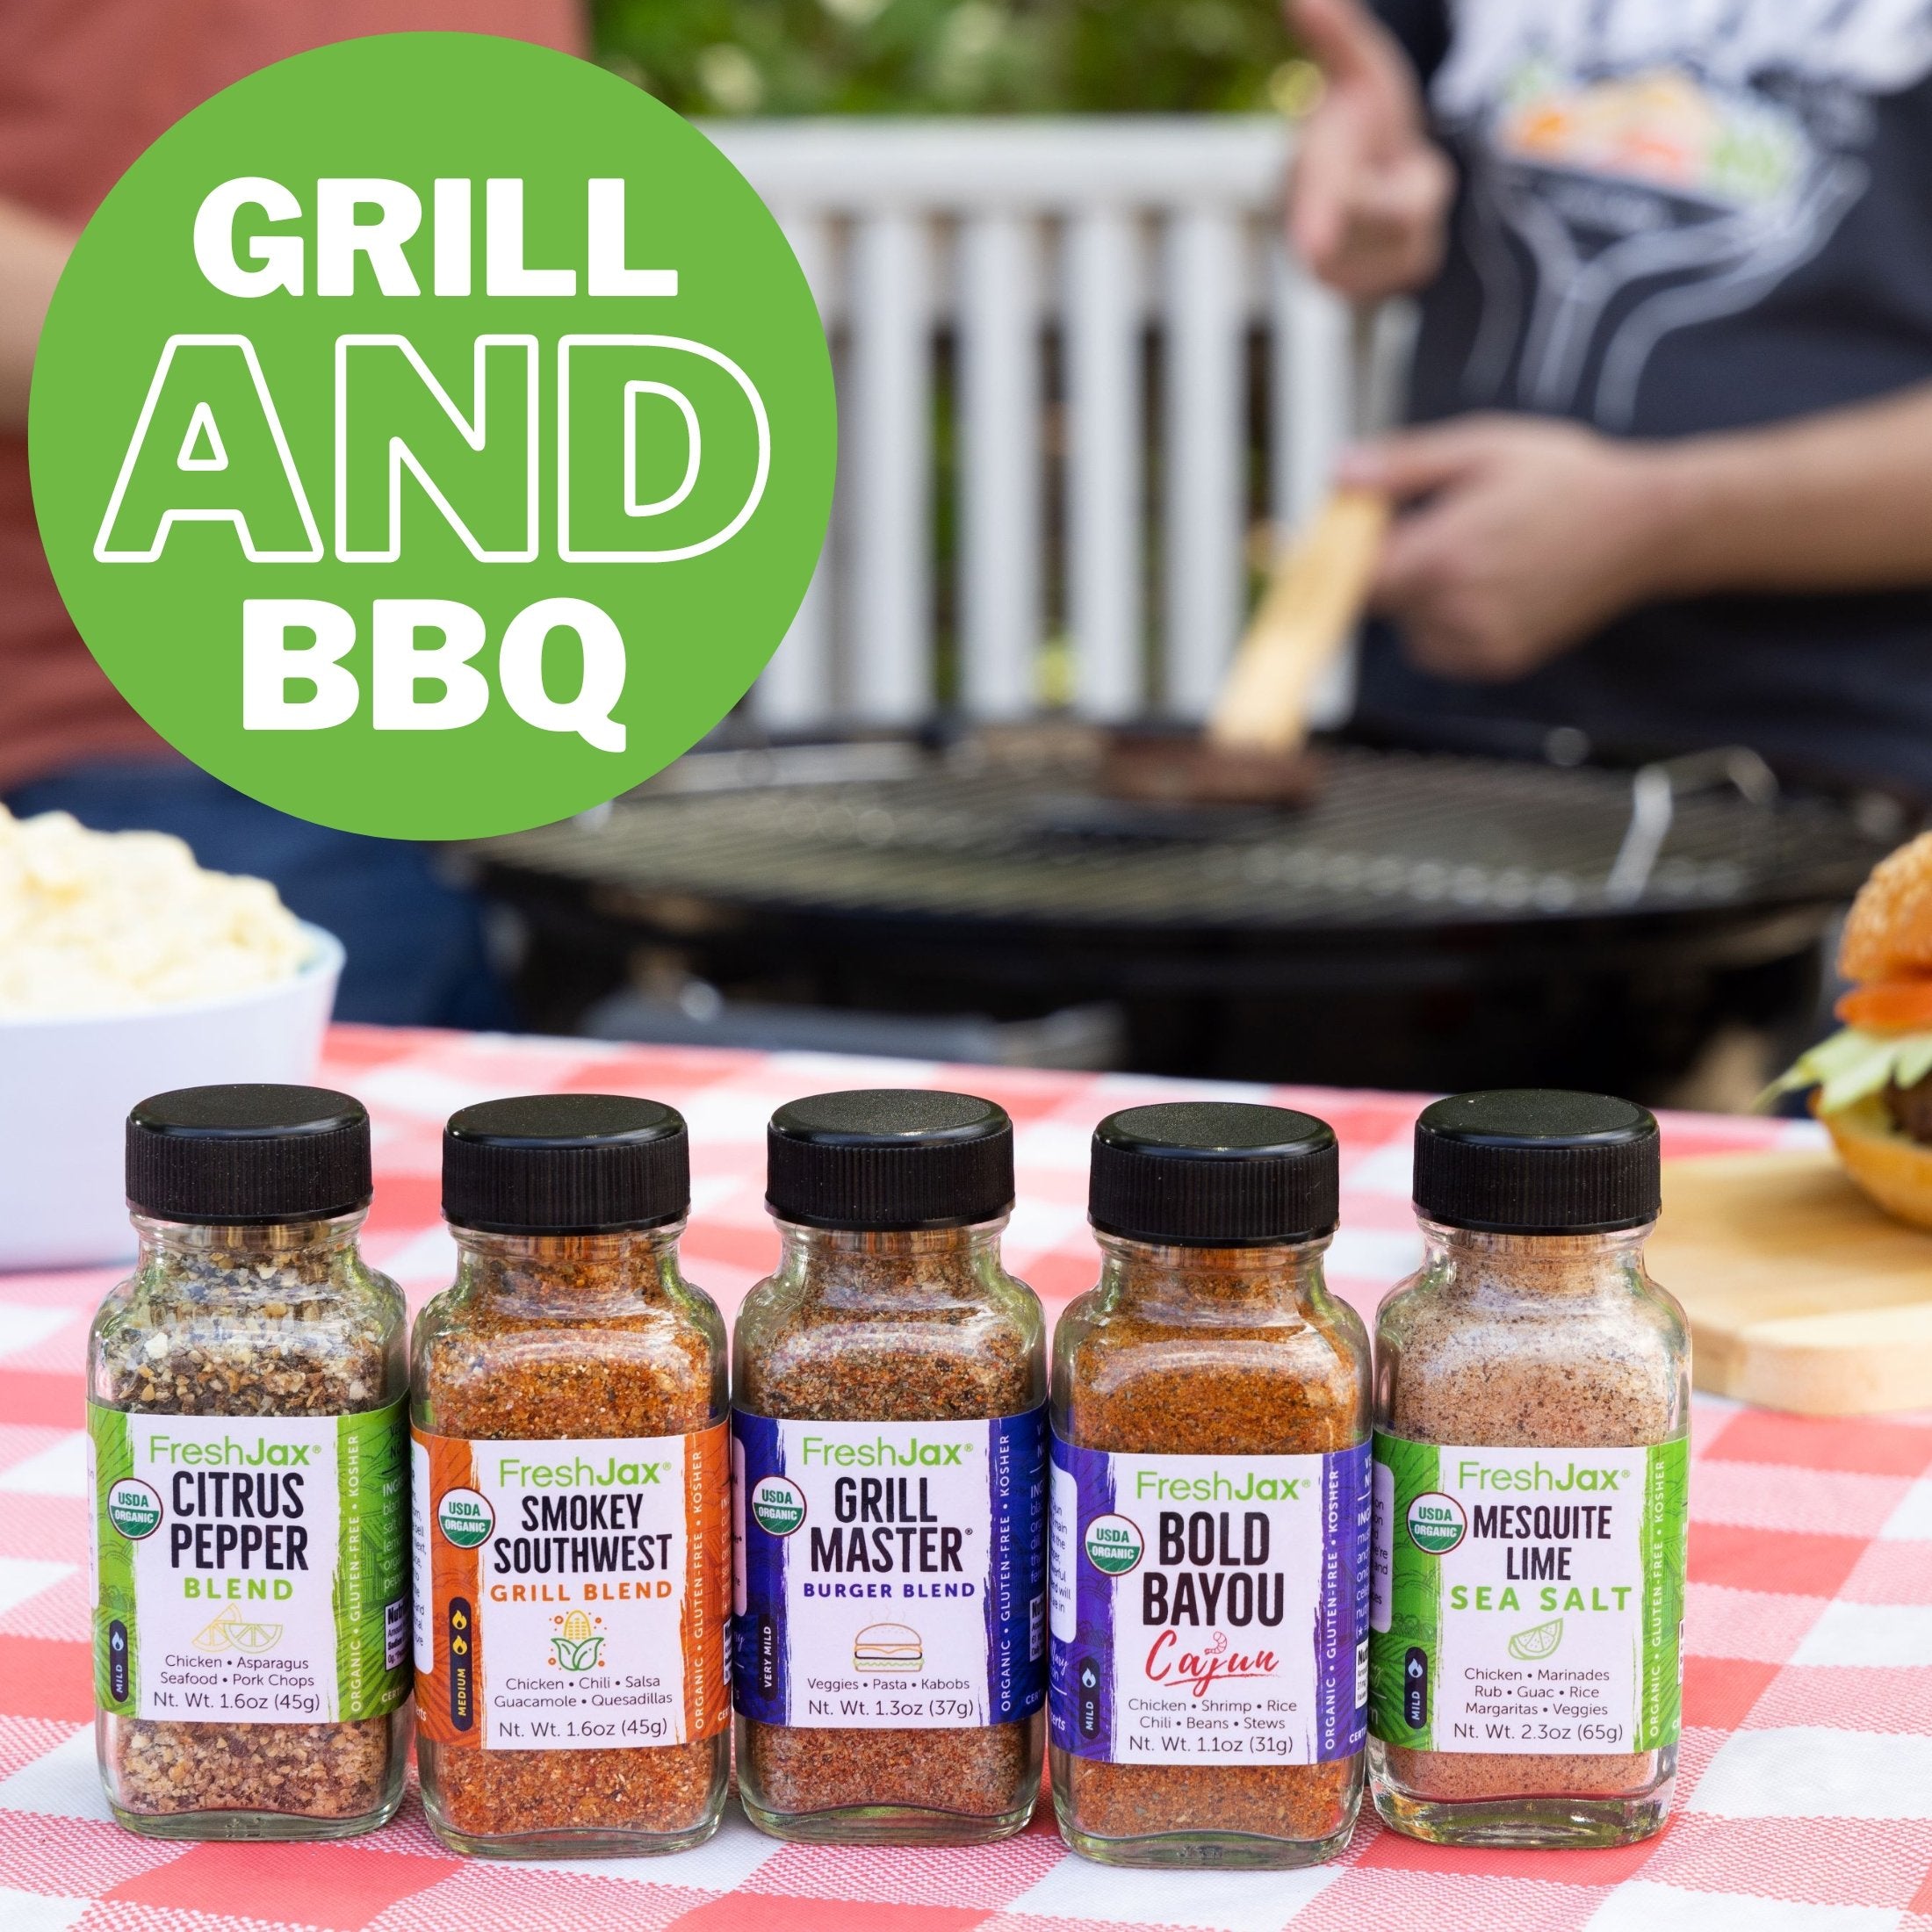 FreshJax Organic Spices Grill and BBQ 6-Pack on a picnic table